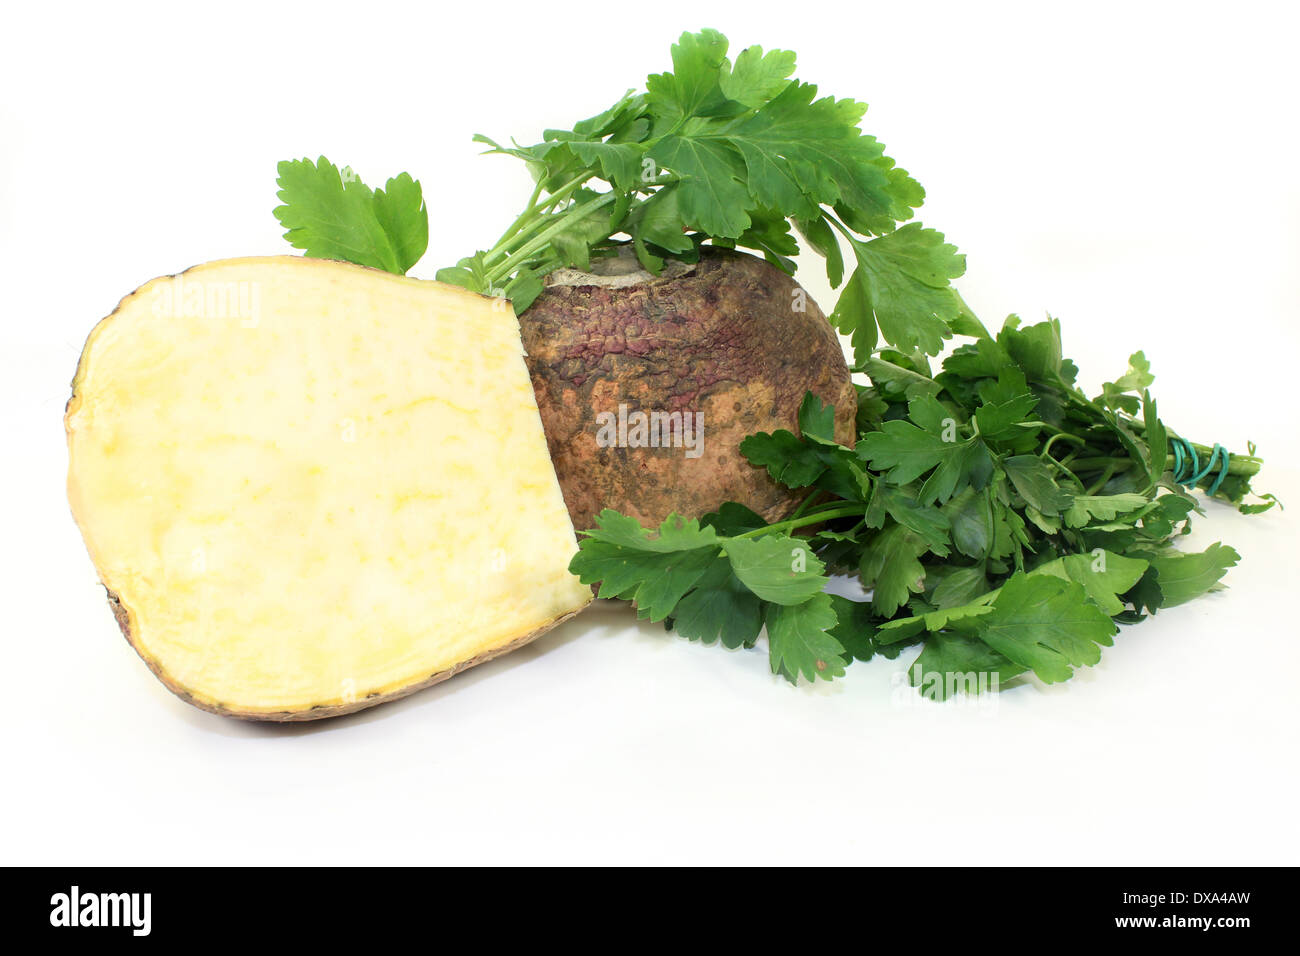 two turnips and parsley against white background Stock Photo